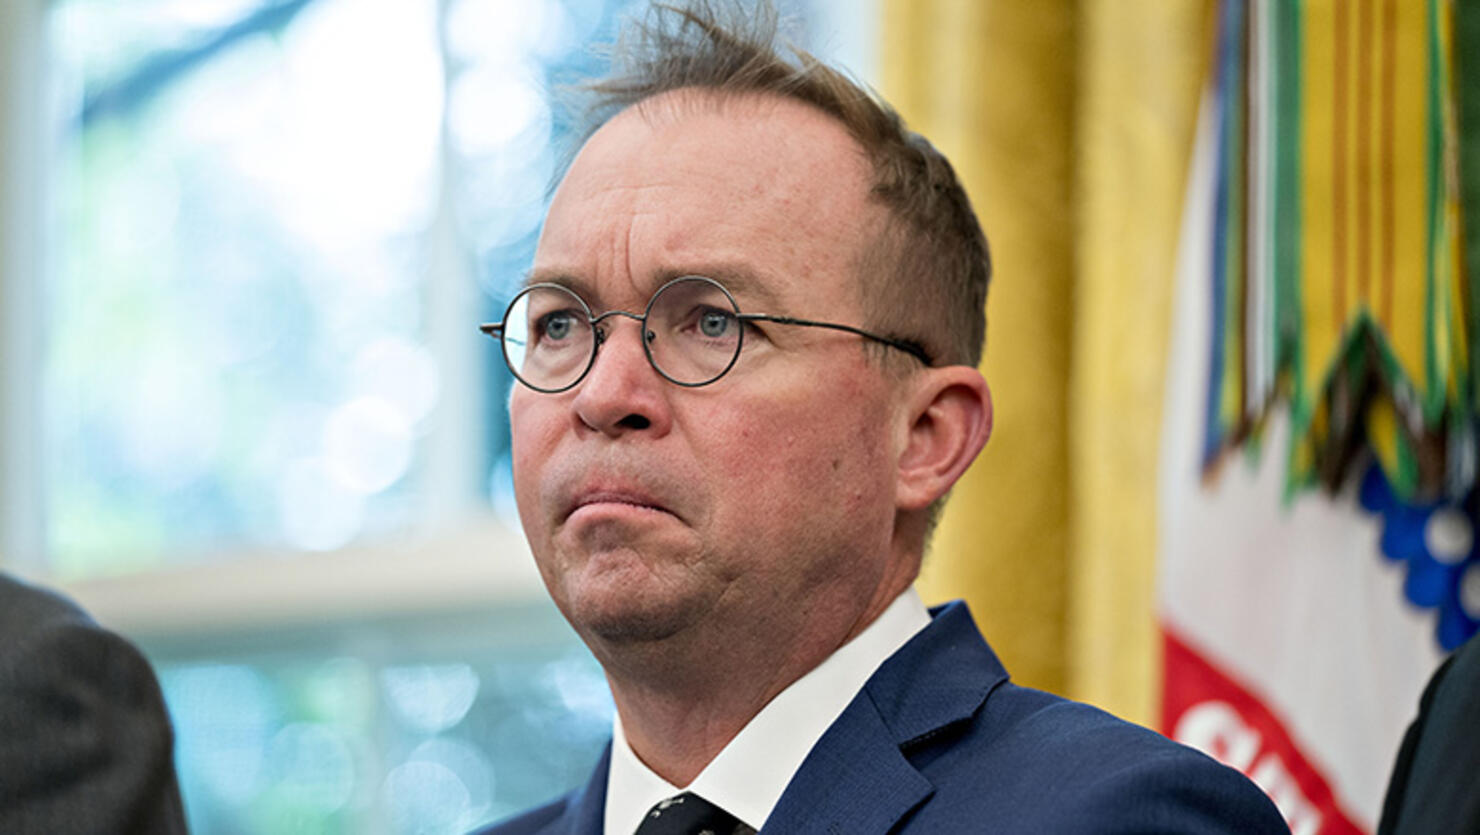 Mick Mulvaney, director of the Office of Management and Budget (OMB), listens during a meeting with U.S. President Donald Trump